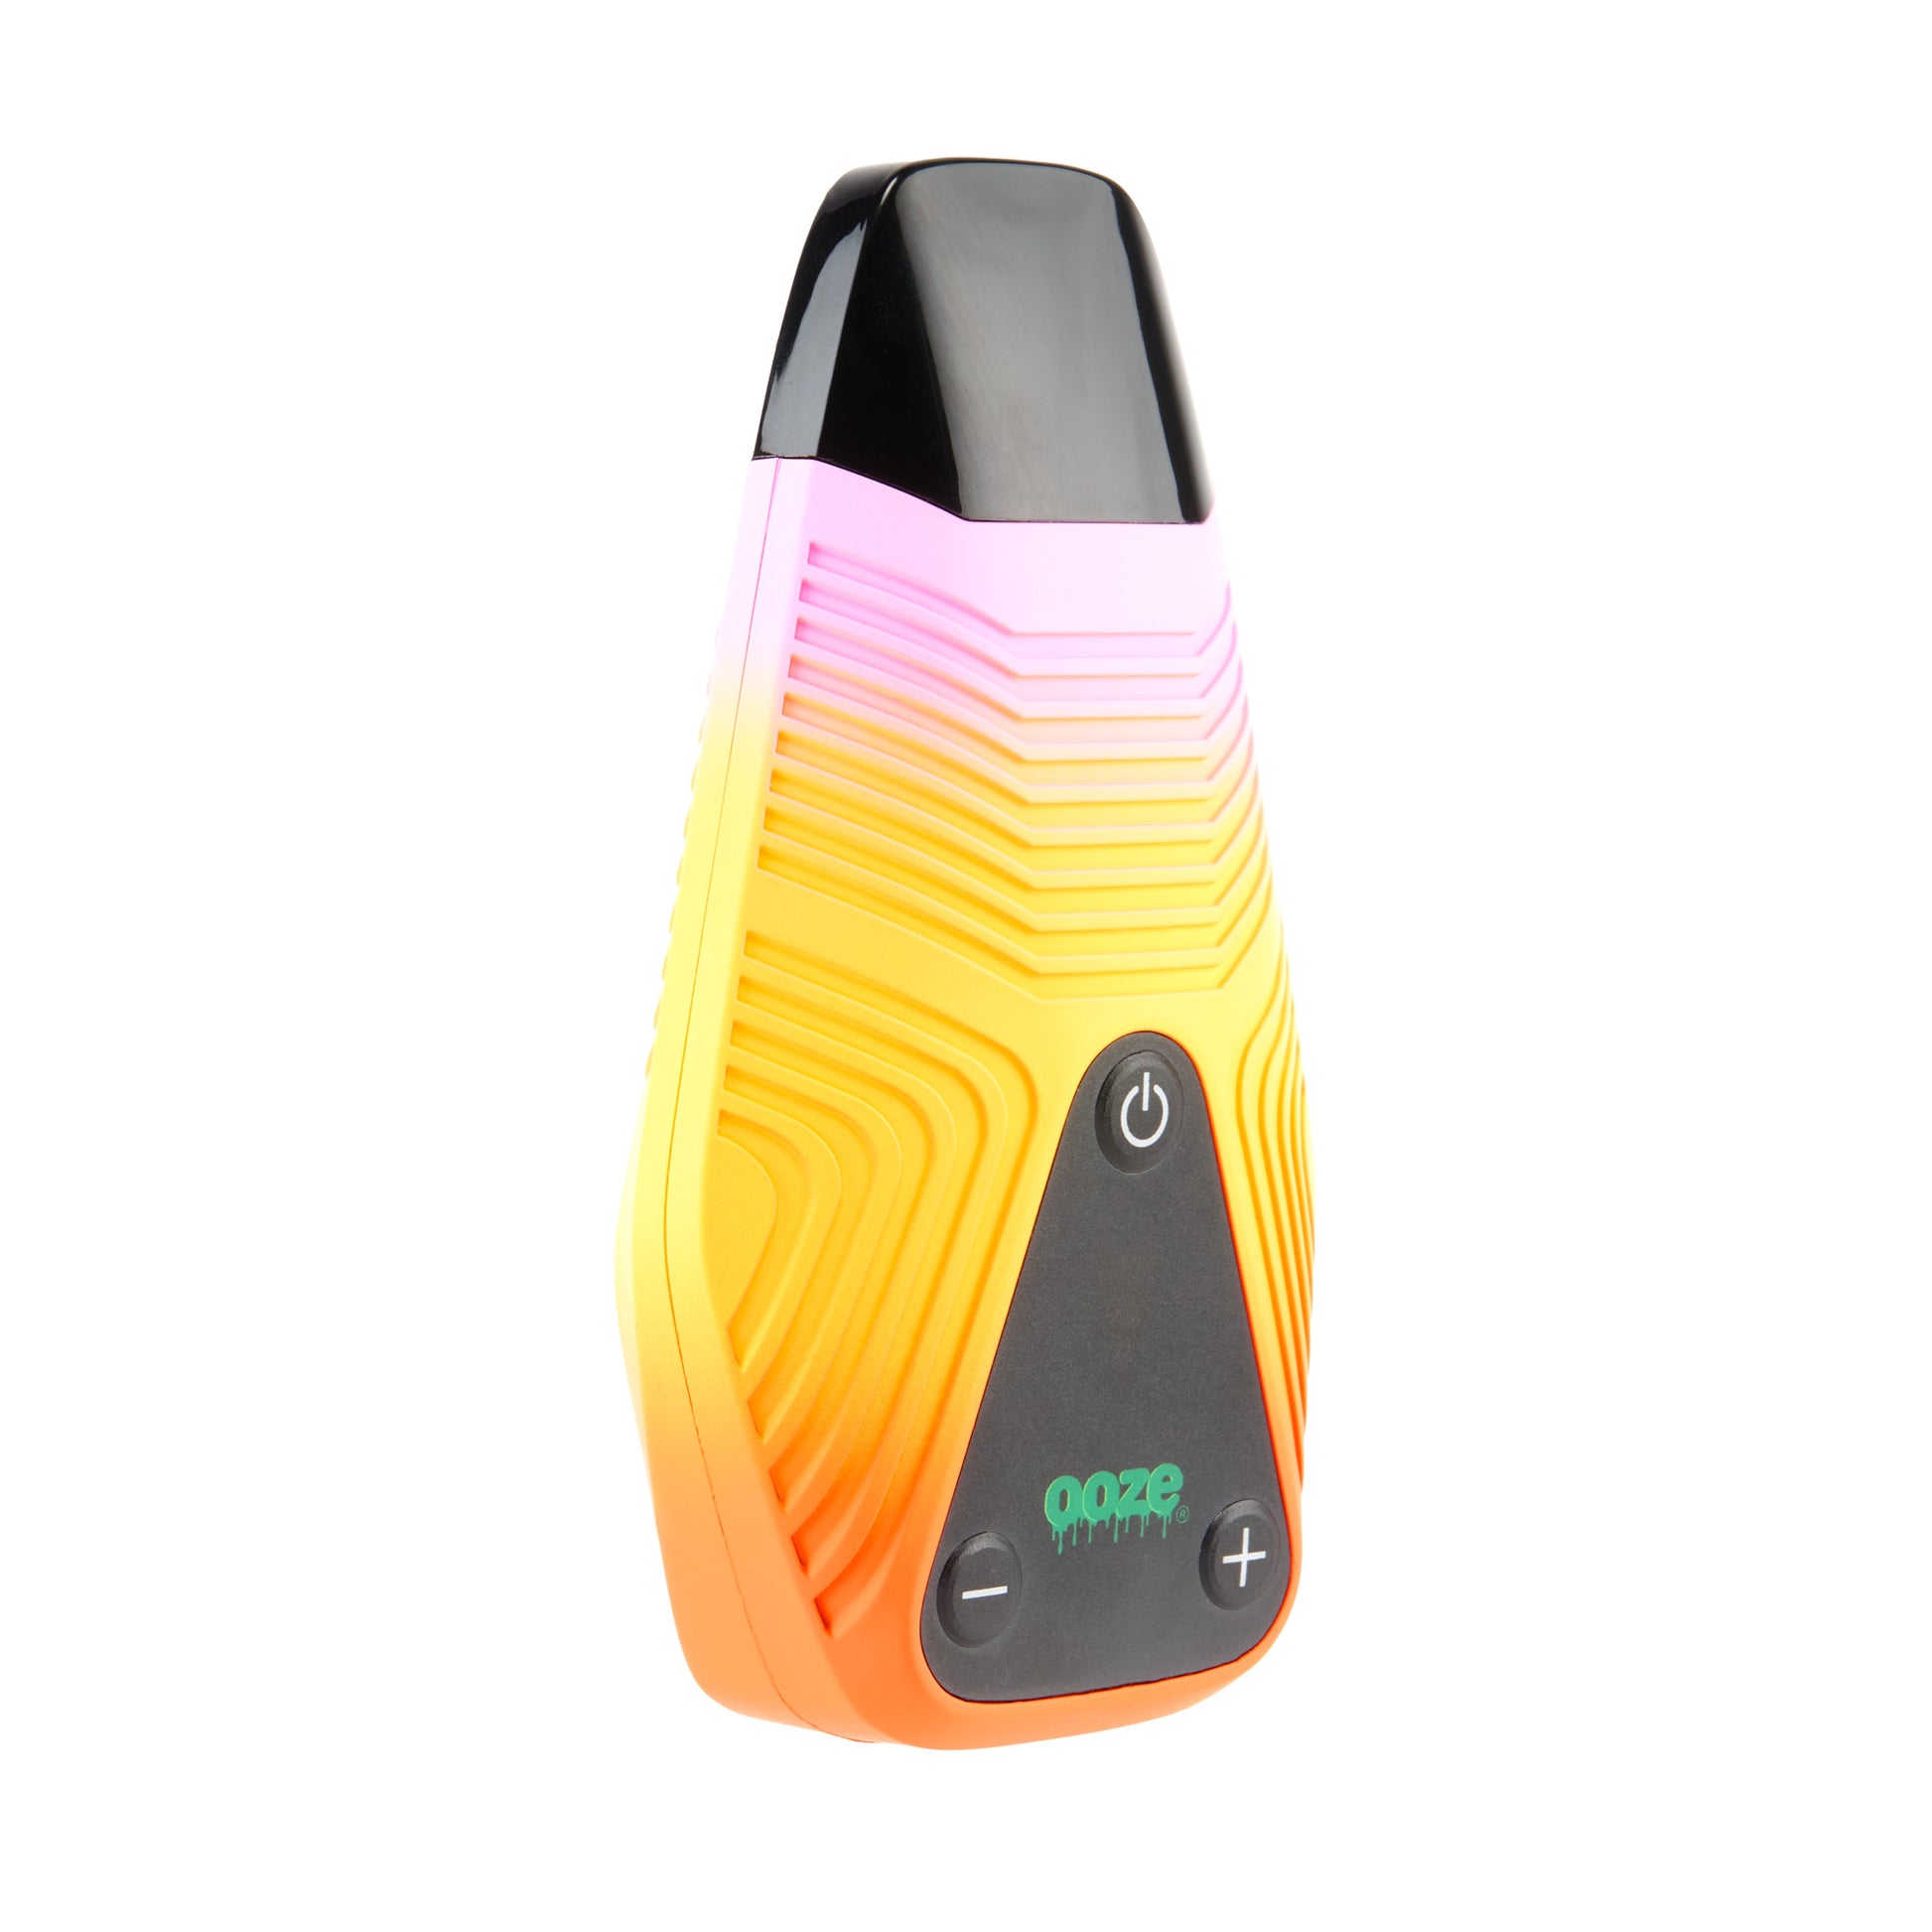 The sunshine Ooze Brink dry herb vape is shown on an angle